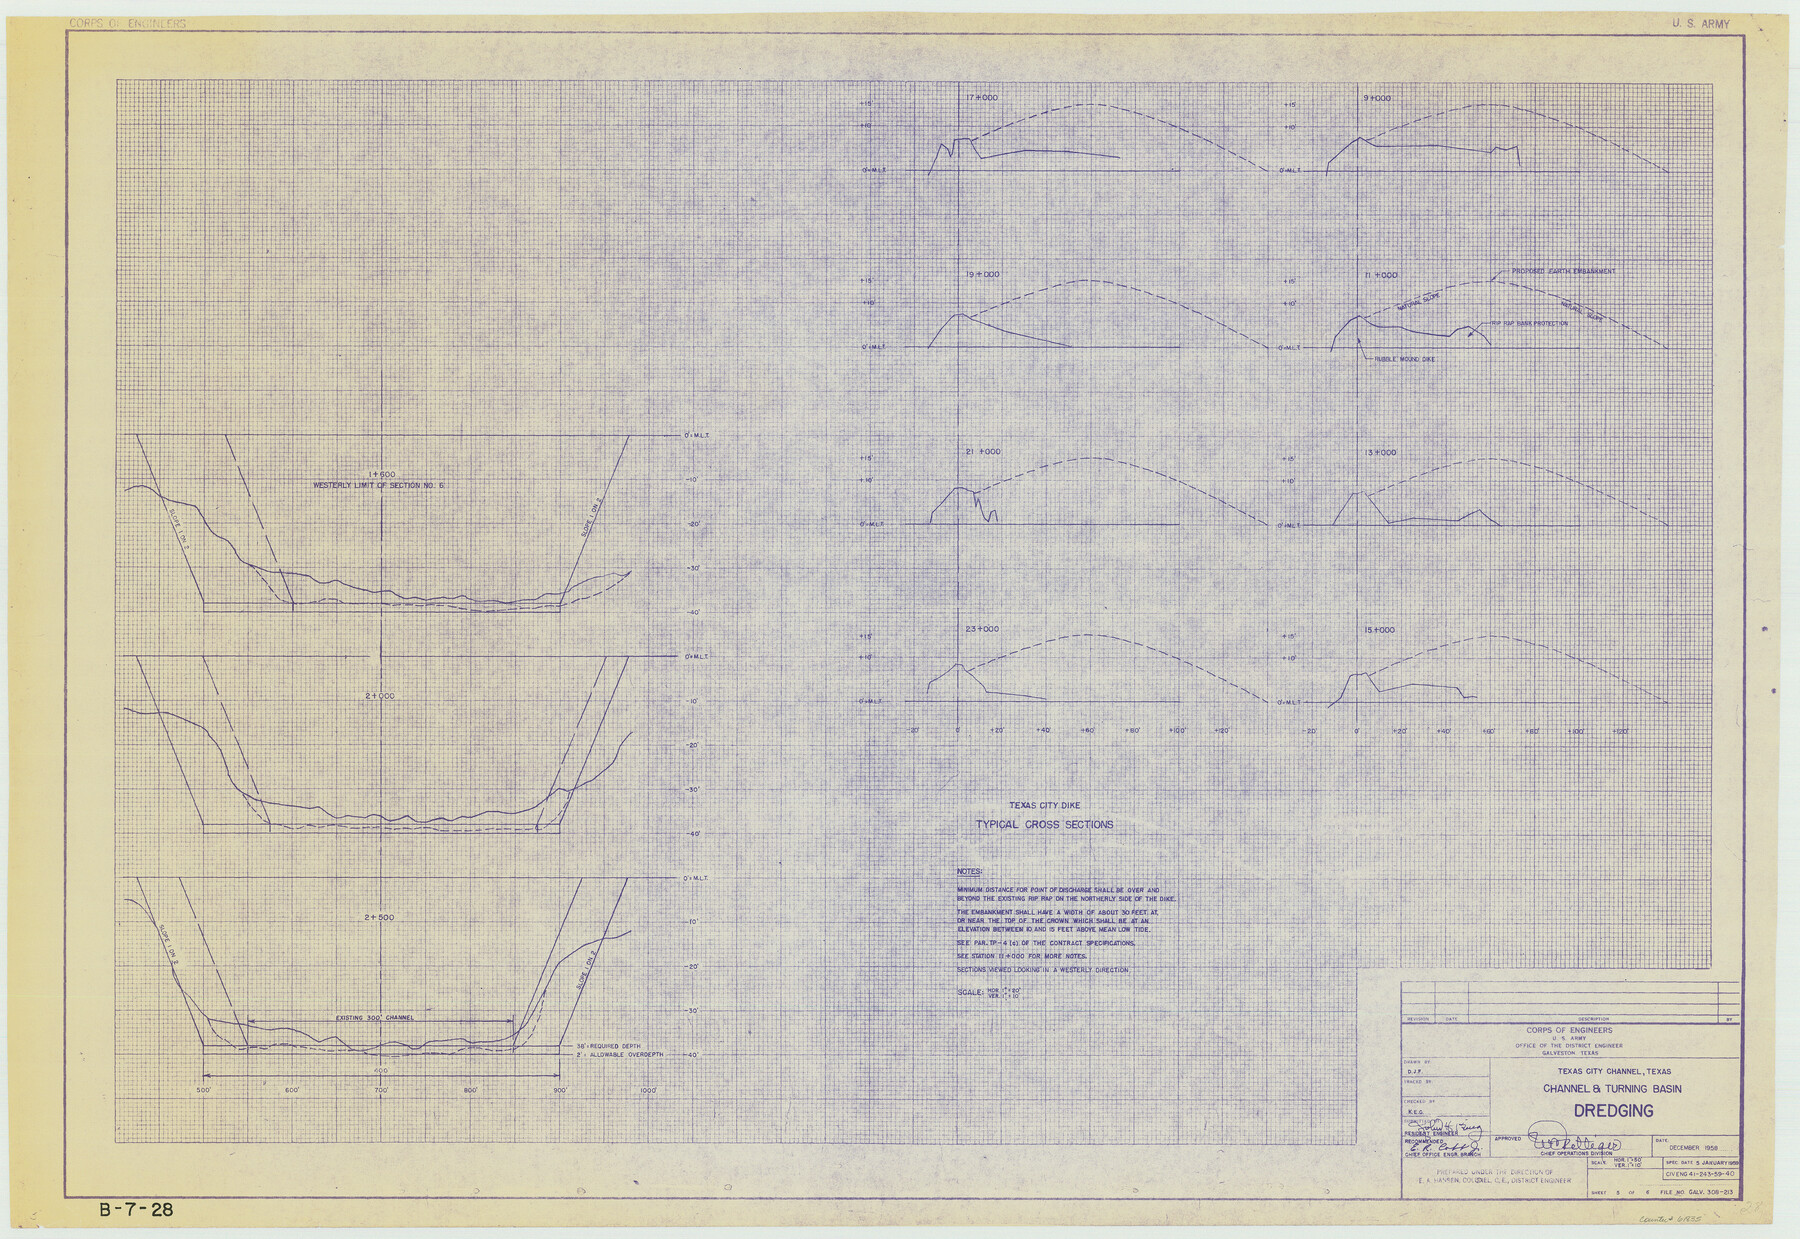 61835, Texas City Channel, Texas, Channel and Turning Basin Dredging - Sheet 5, General Map Collection